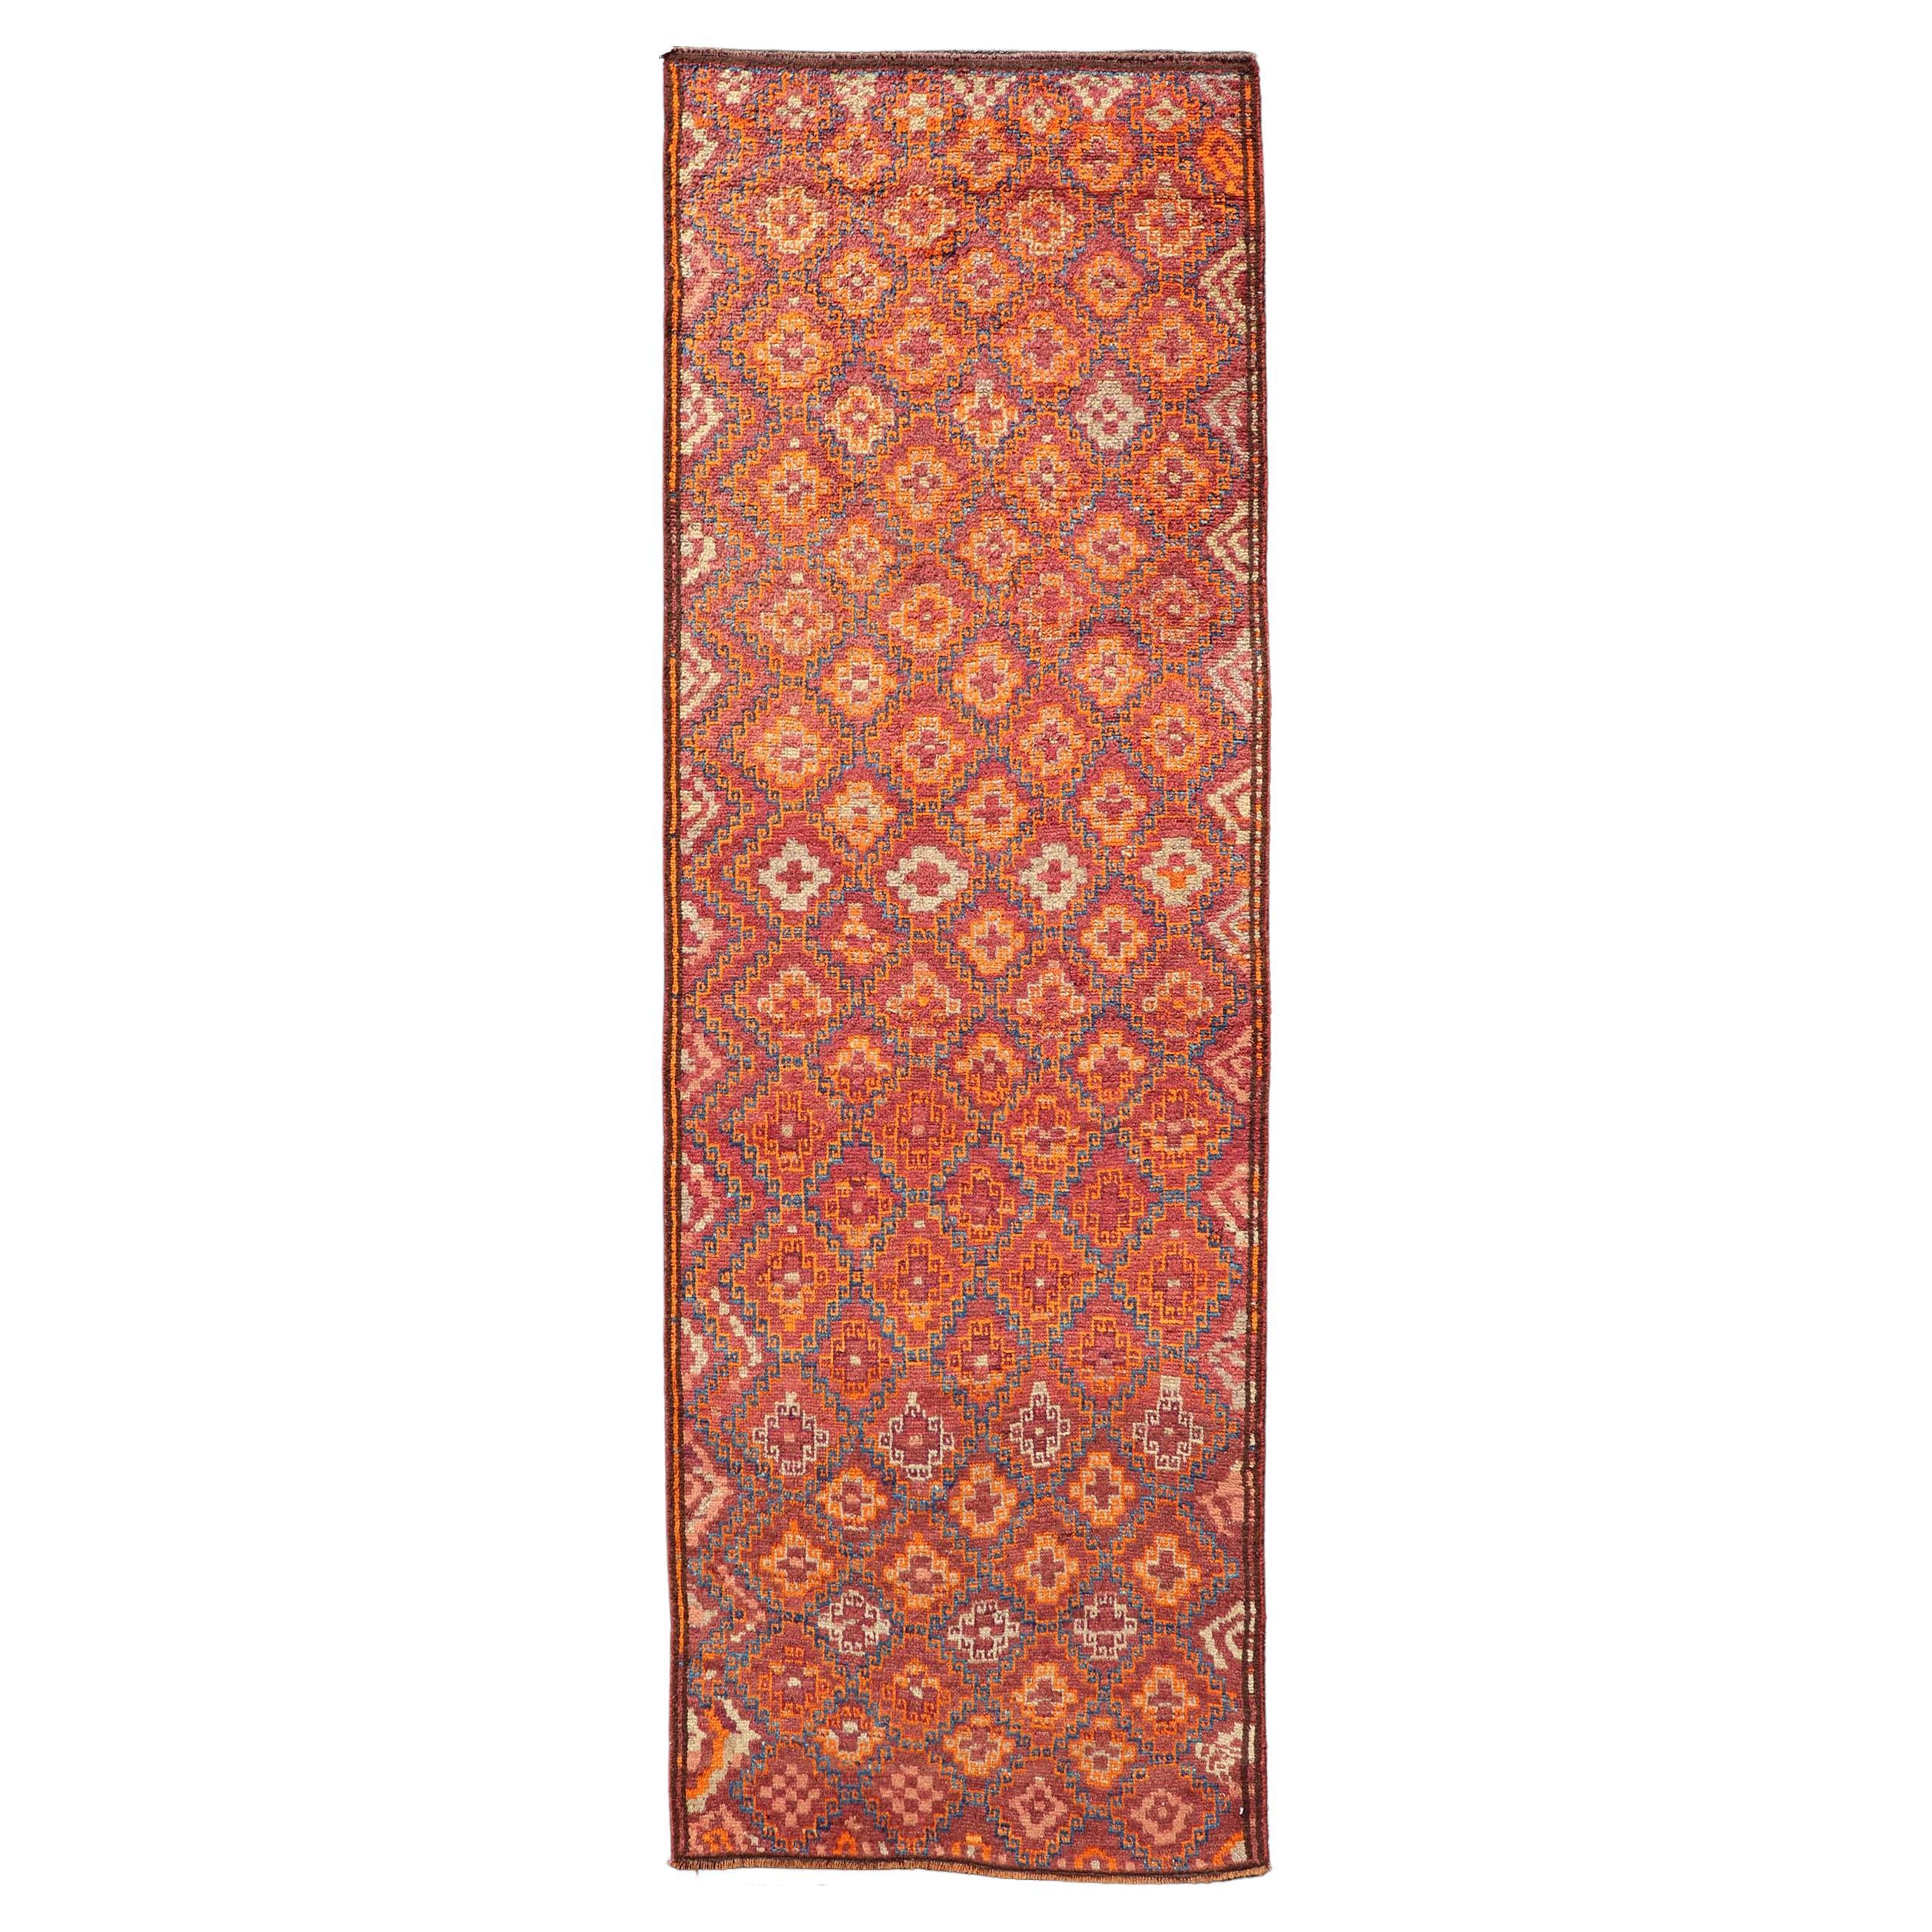 Antique Hand-Knotted Baluch Tribal Runner with All-Over Geometric Diamond Design